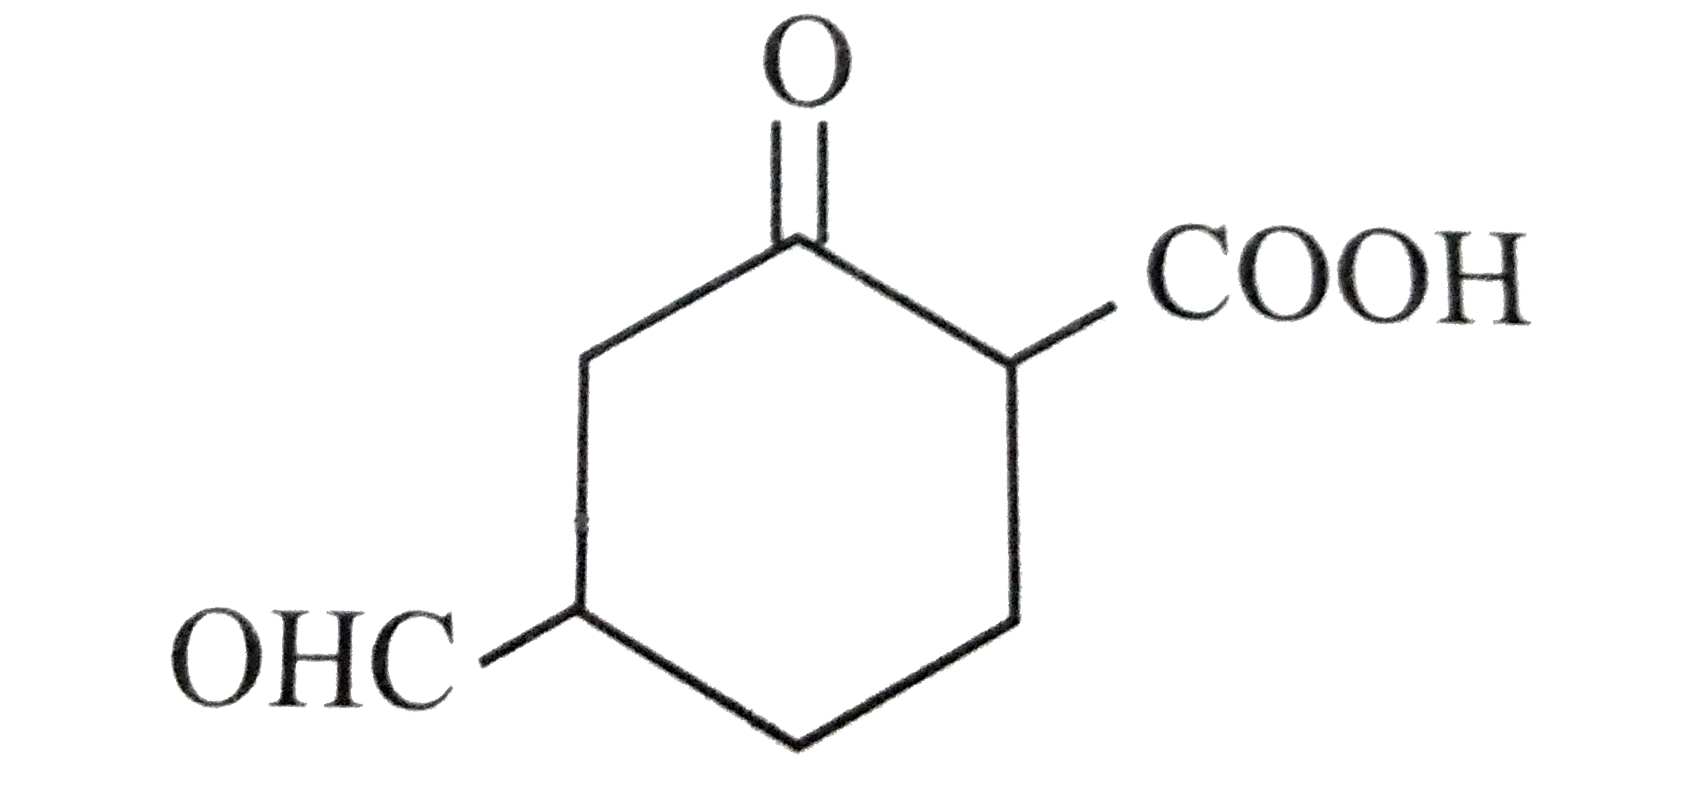 The correct IUPAC name of the compound    is